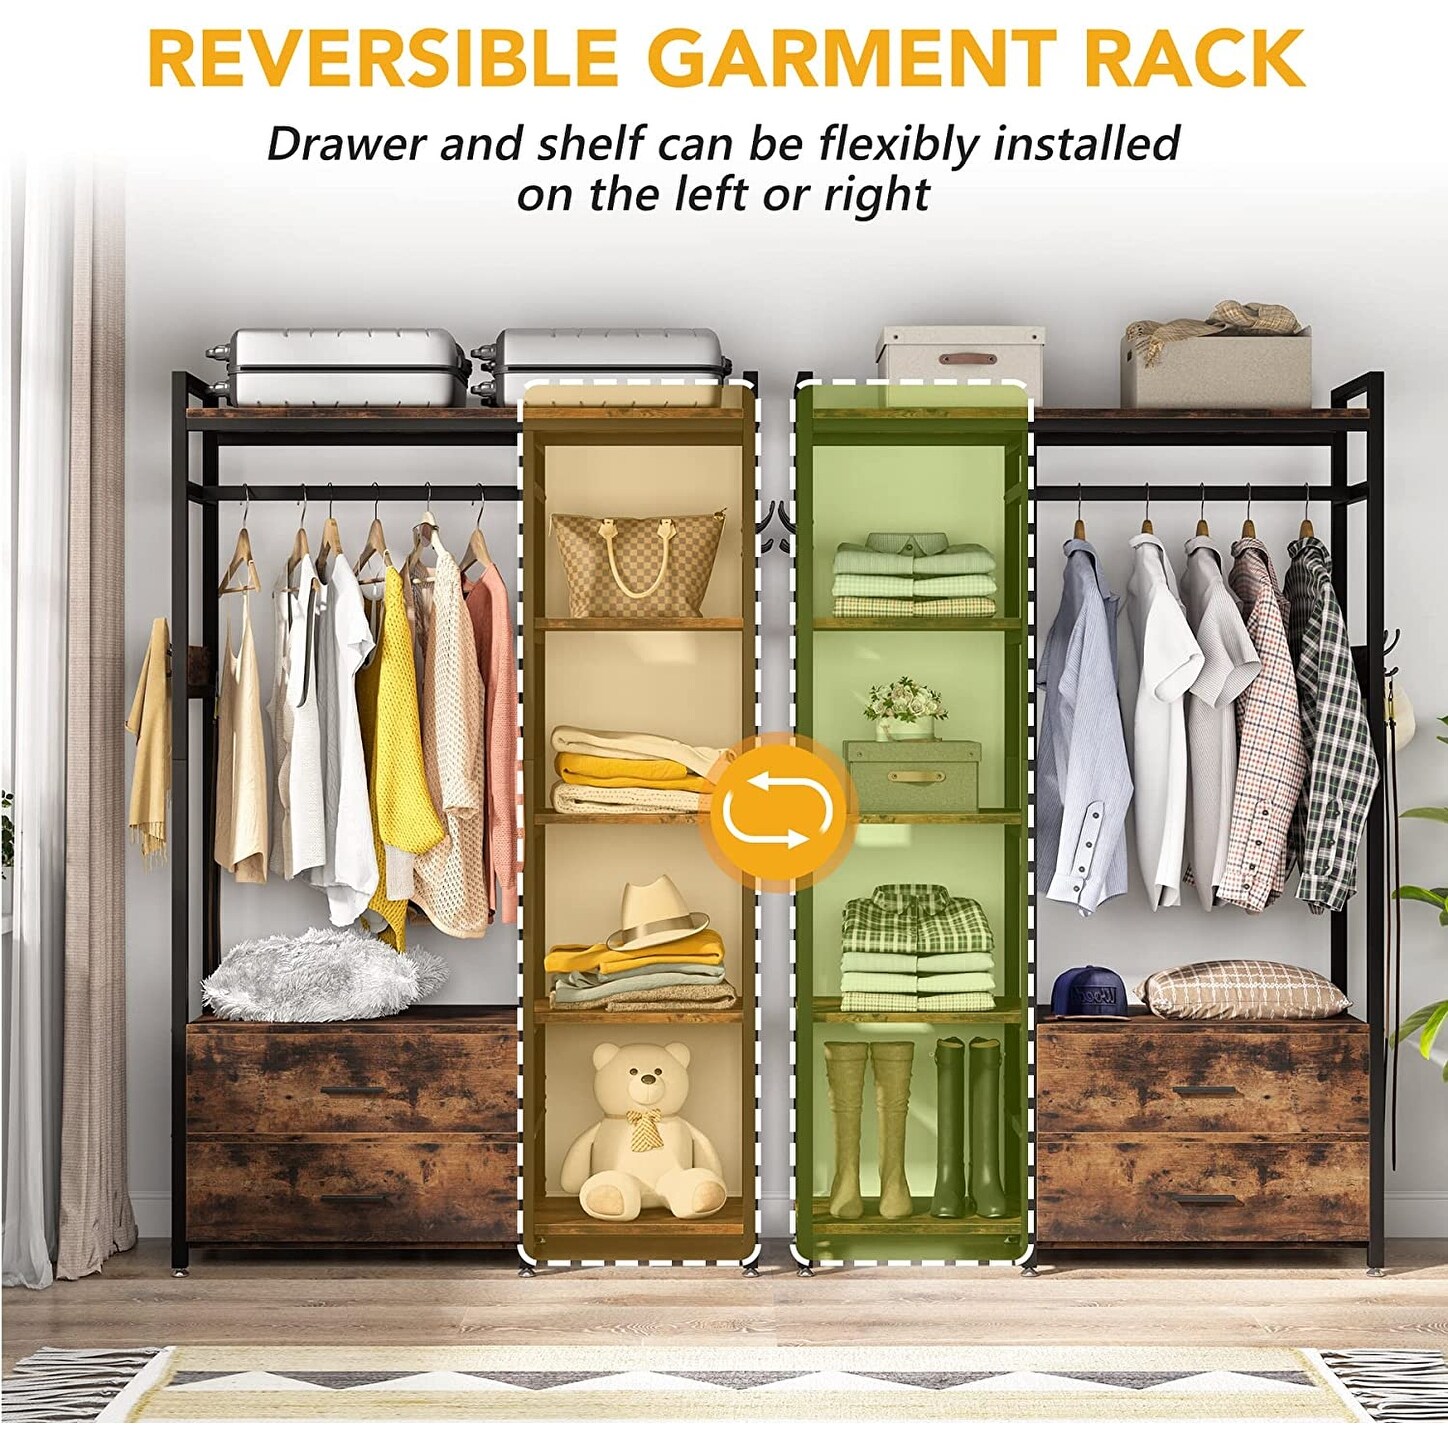 https://ak1.ostkcdn.com/images/products/is/images/direct/5f453a9b30783450aab74680f61e24c43b4992cb/Freestanding-Closet-Organizer-with-2-Drawers%2C-Clothes-Shelf-Garment-Rack-with-Shelves-and-Hanging-Rod%2C-Clothing-Storage-Brown.jpg